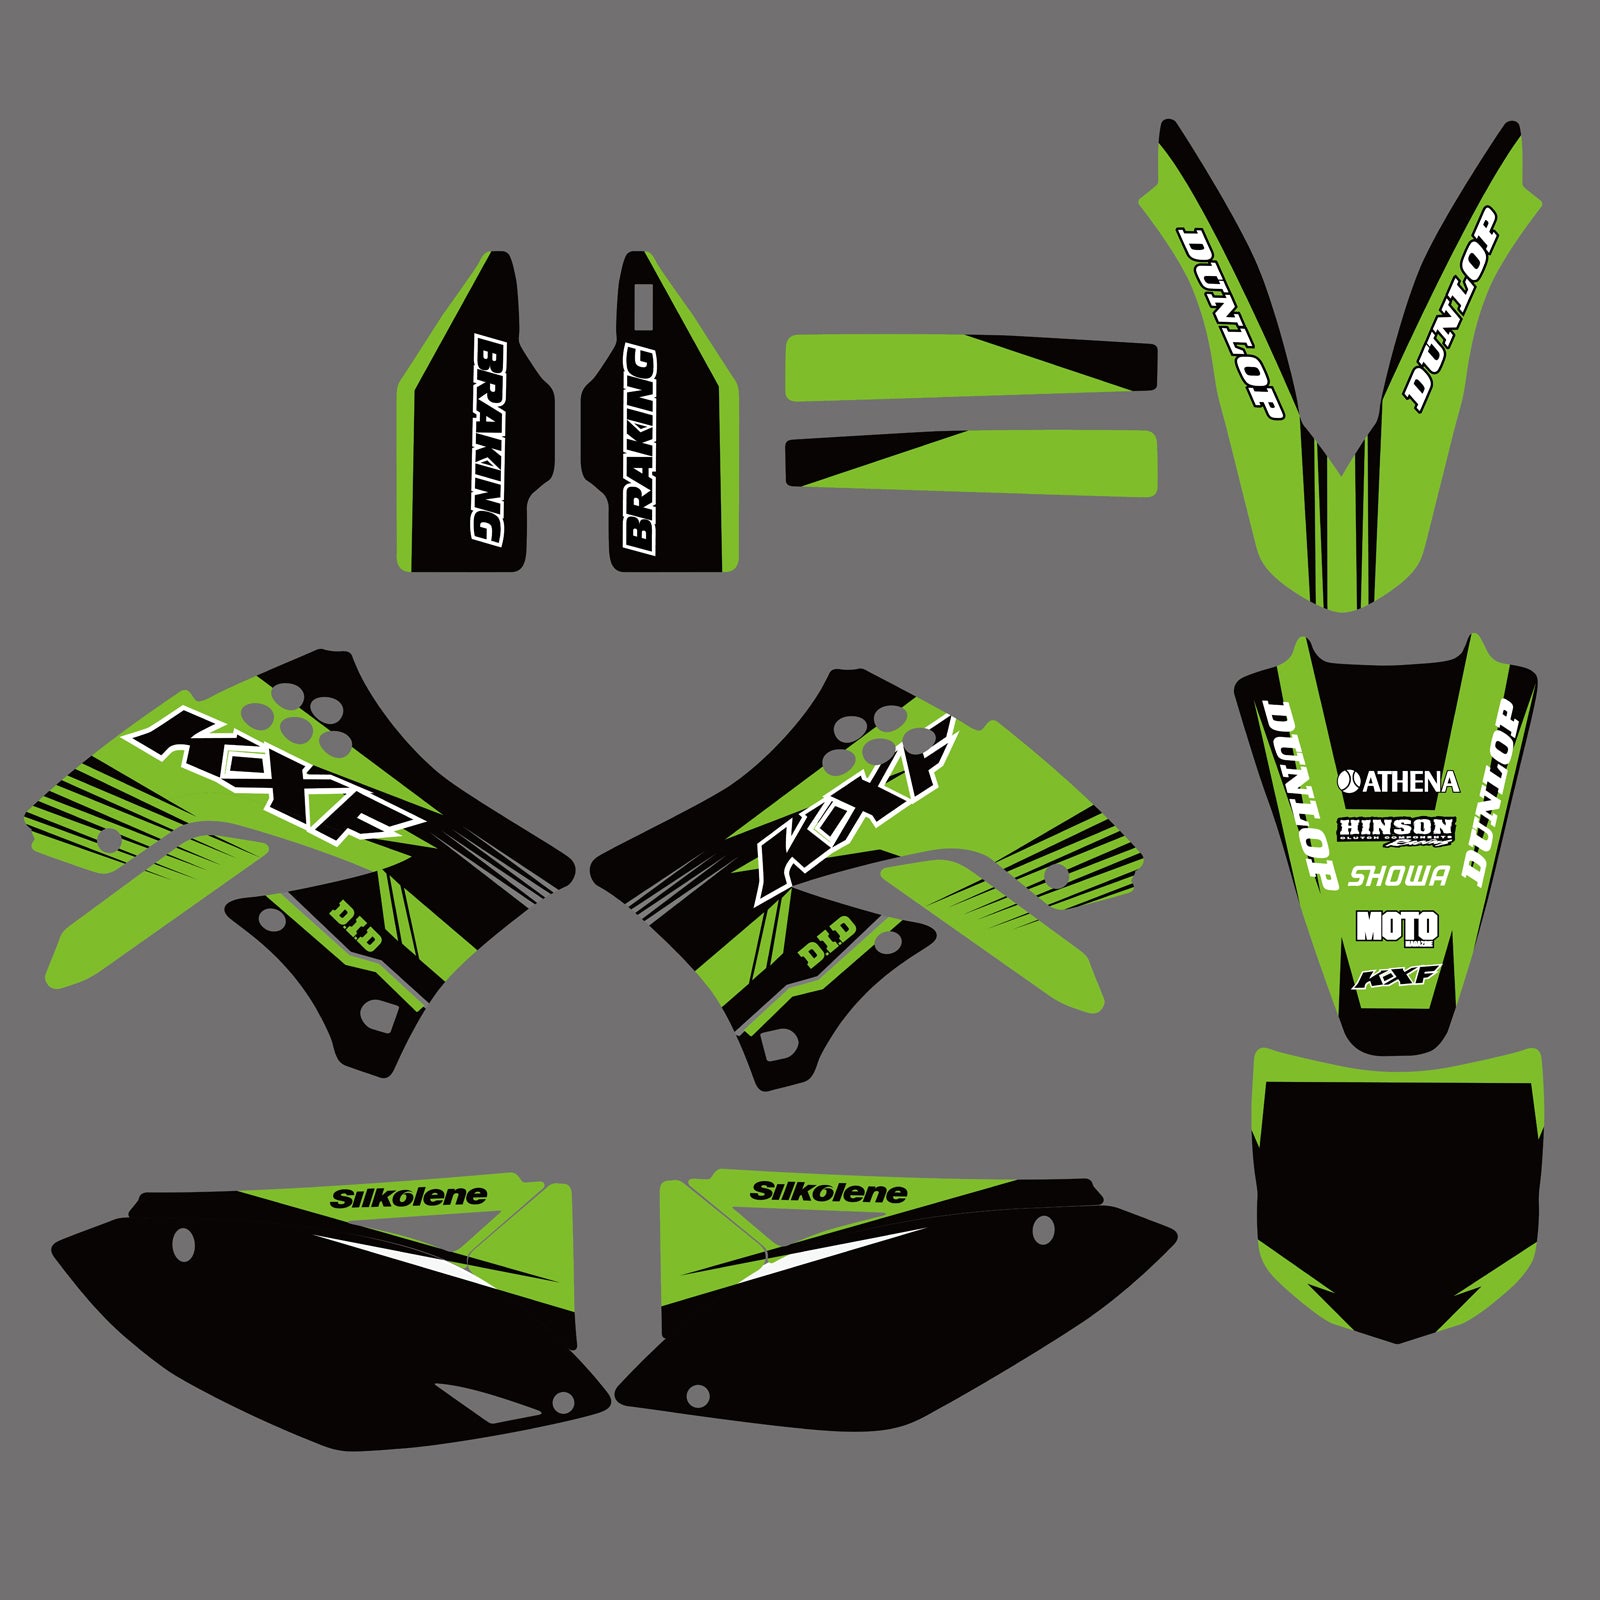 Team Graphics Backgrounds Decals Stickers For Kawasaki KXF 250 KX250F 2009-2012